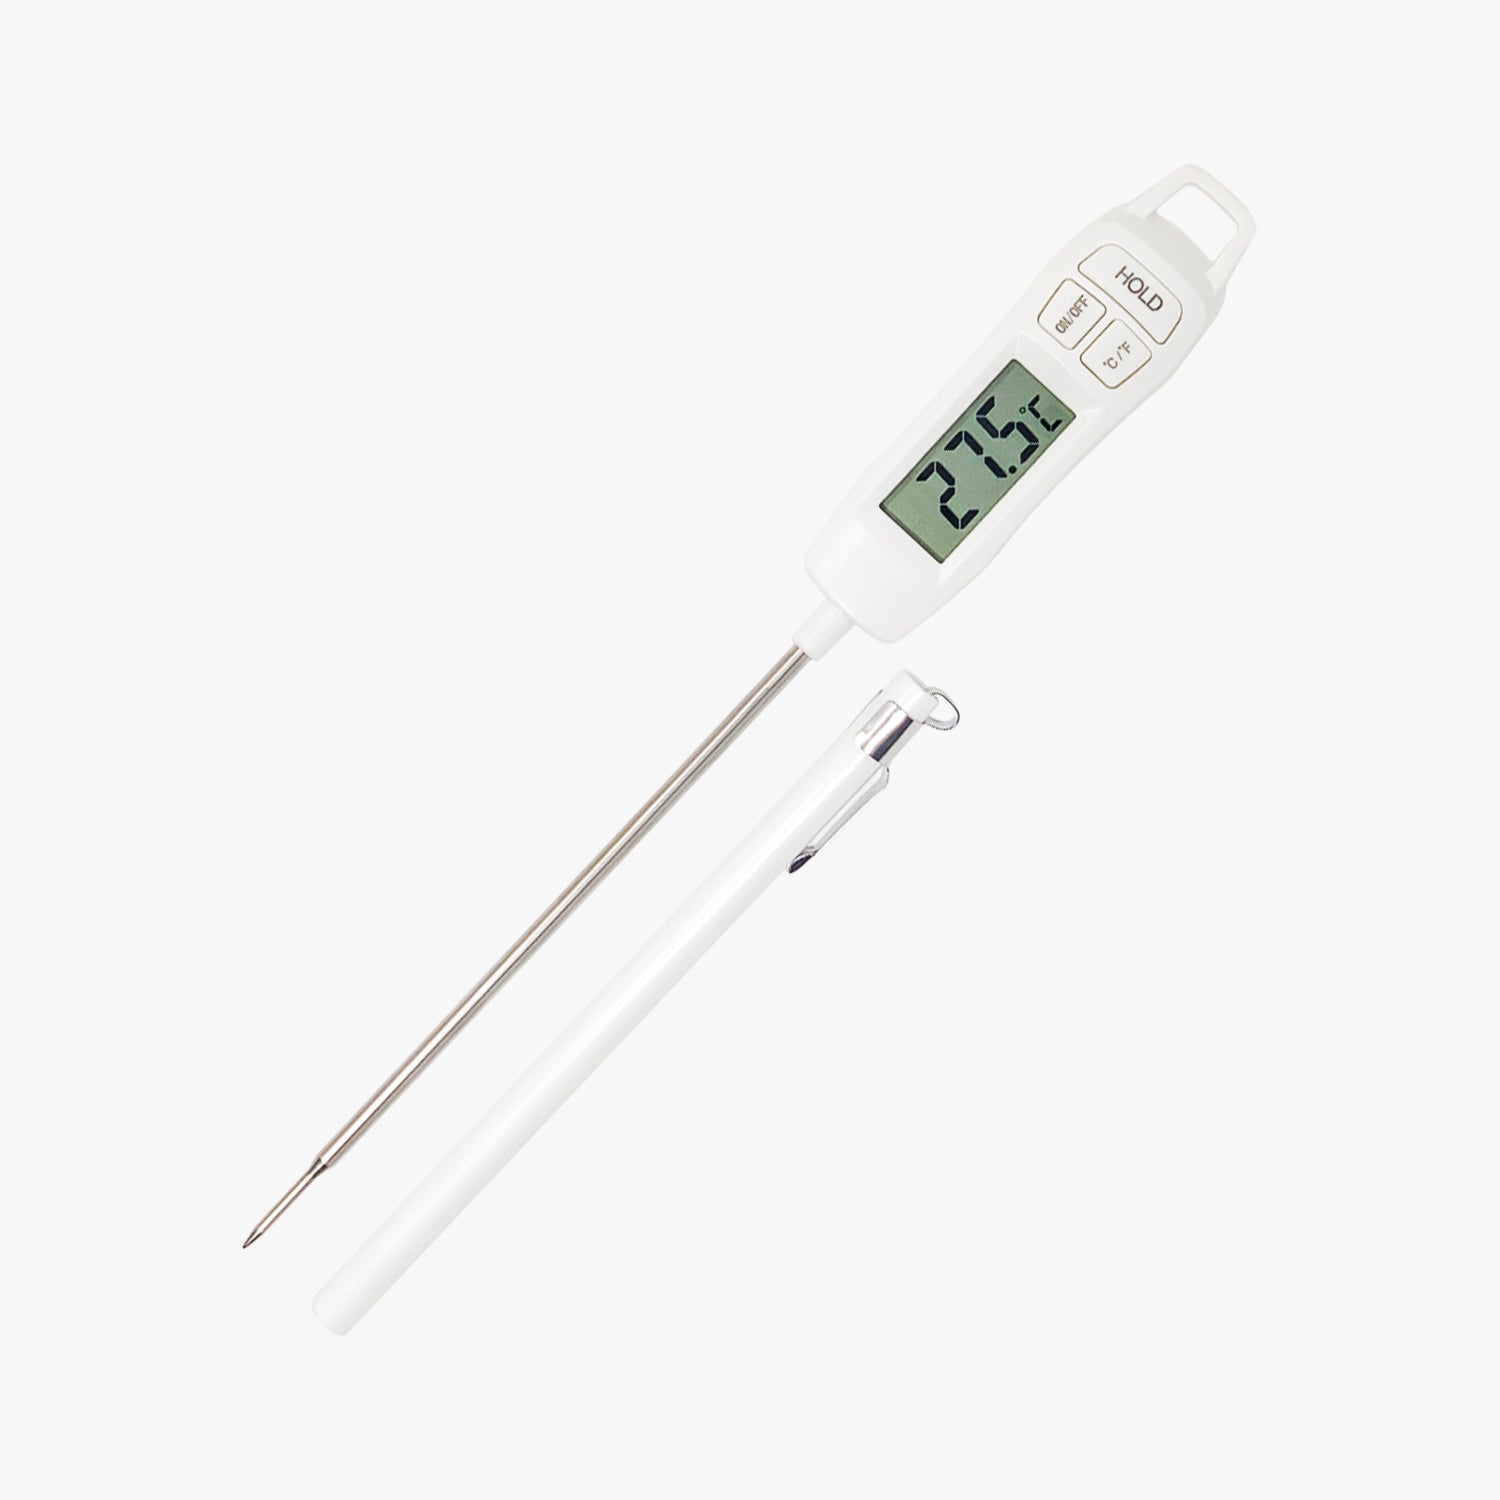 Cooking Thermometer, Digital Thermometer